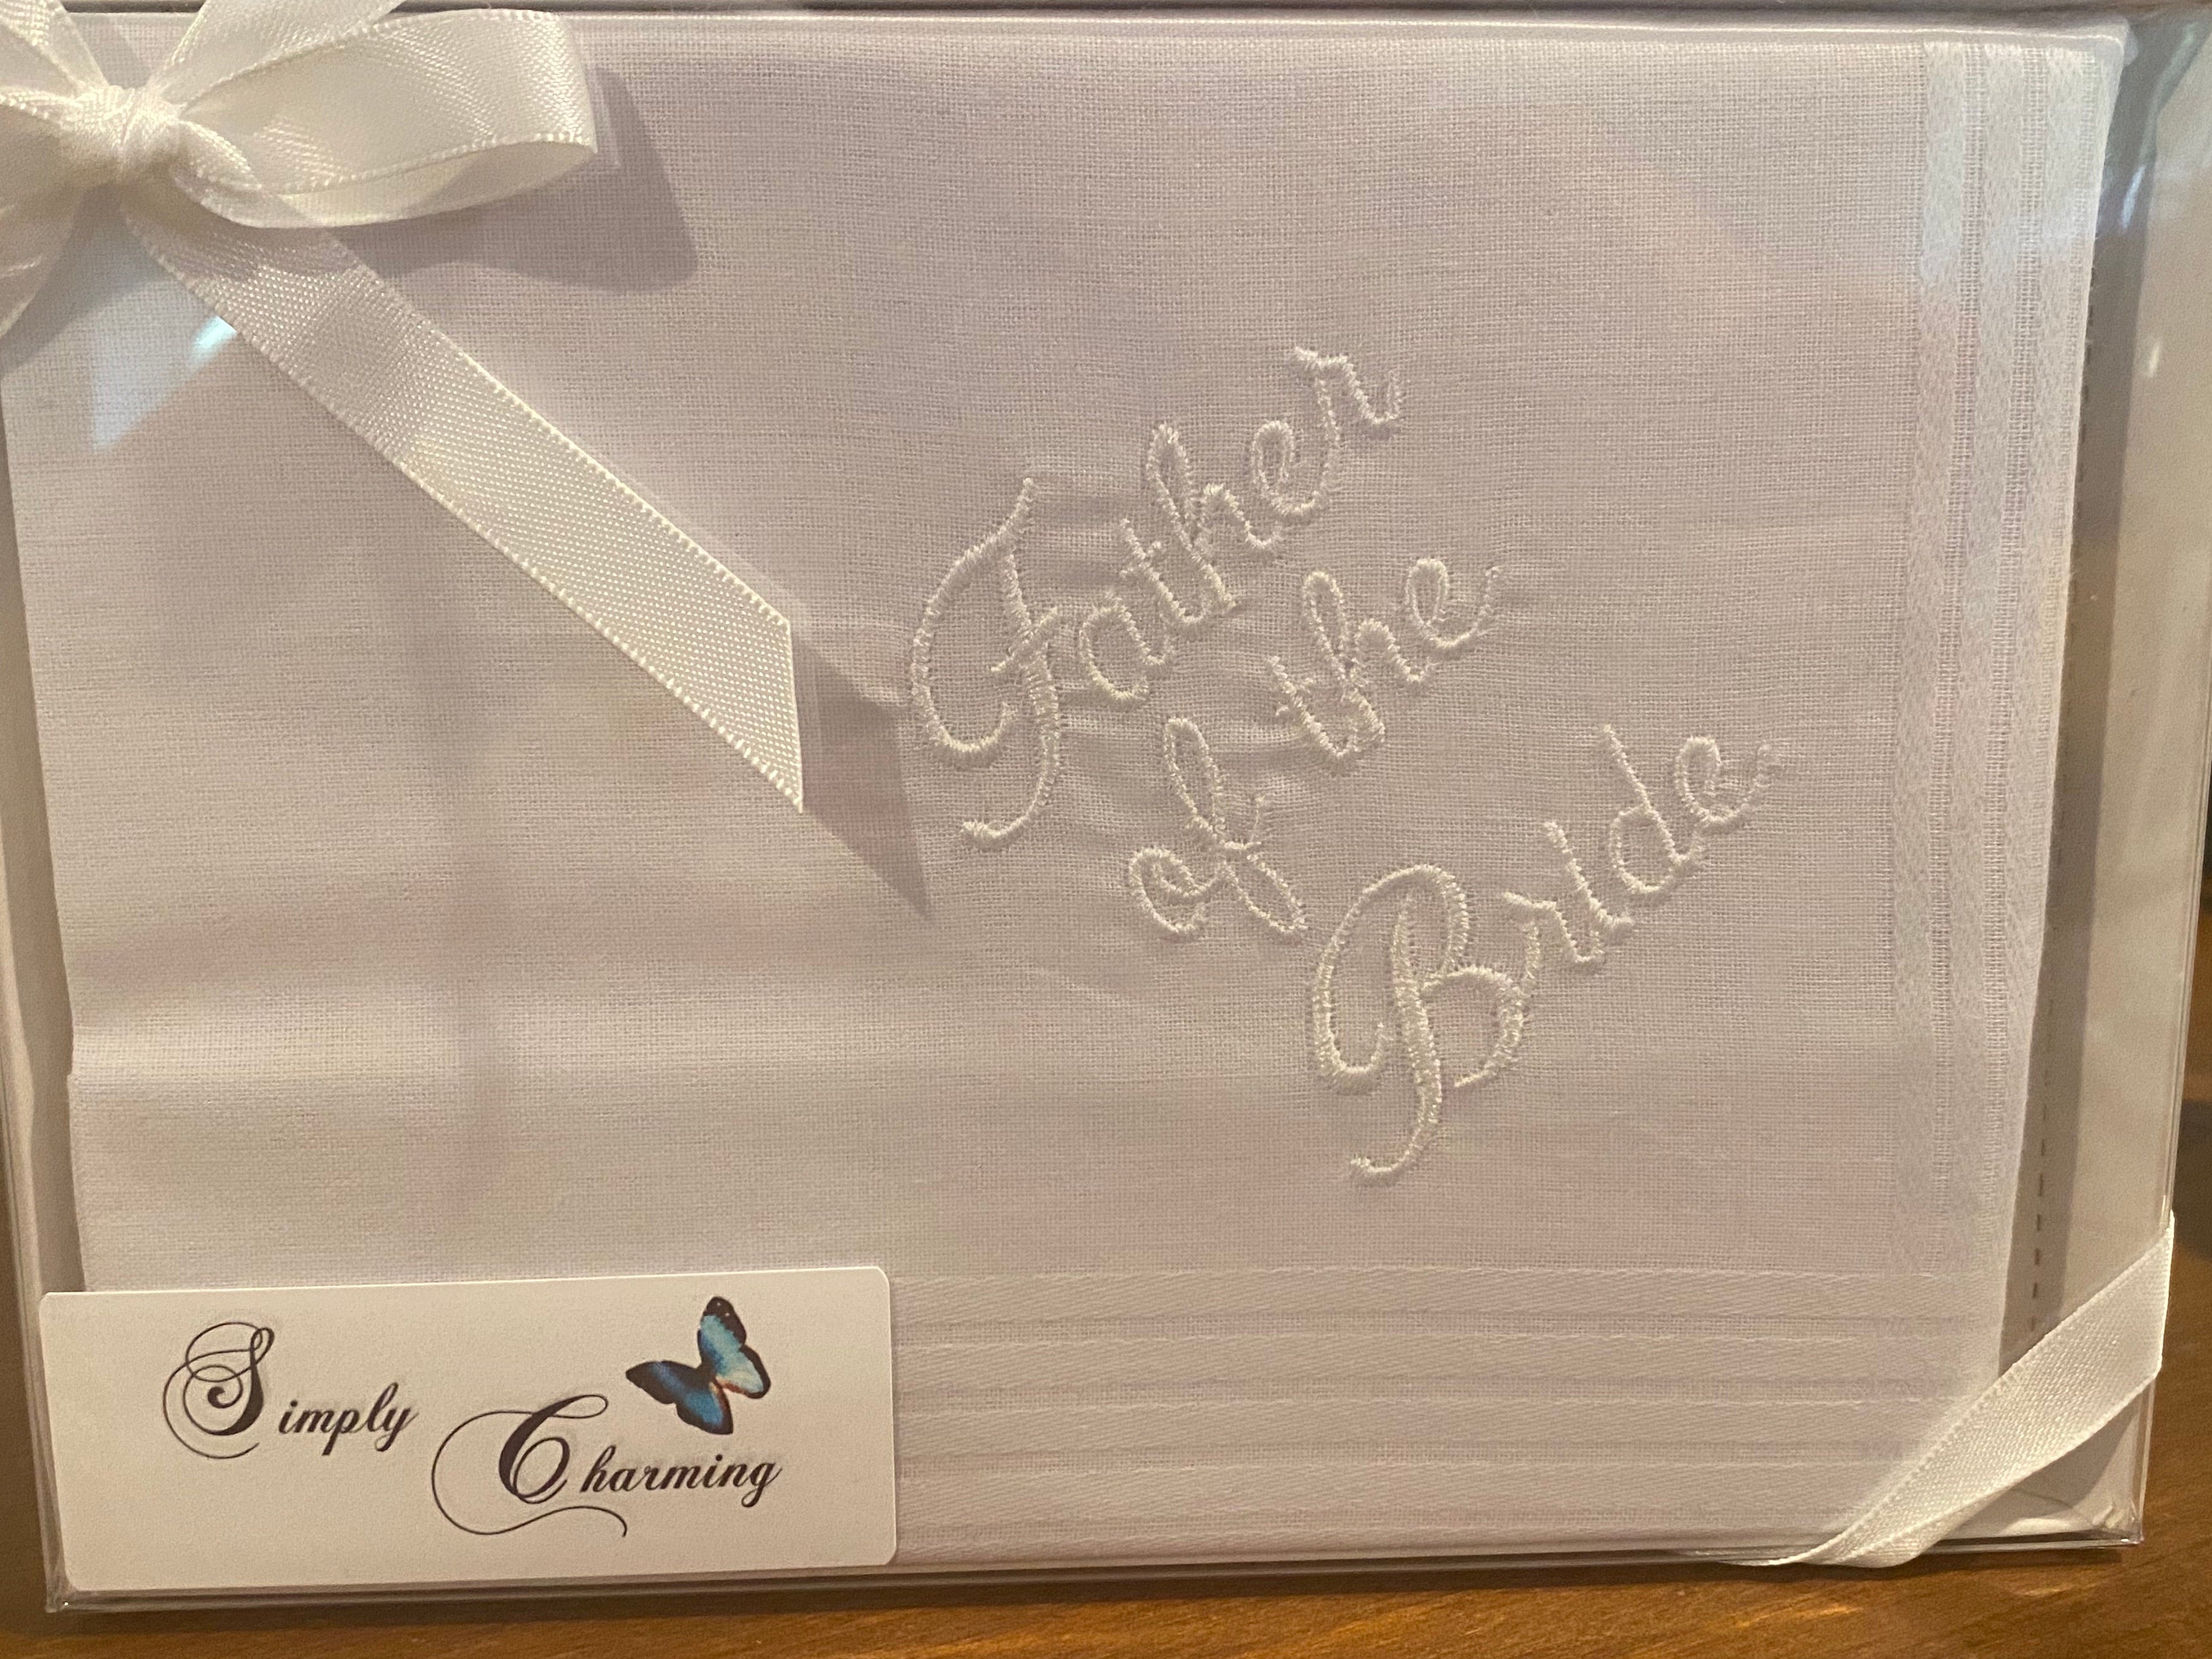 Father of the bride hanky